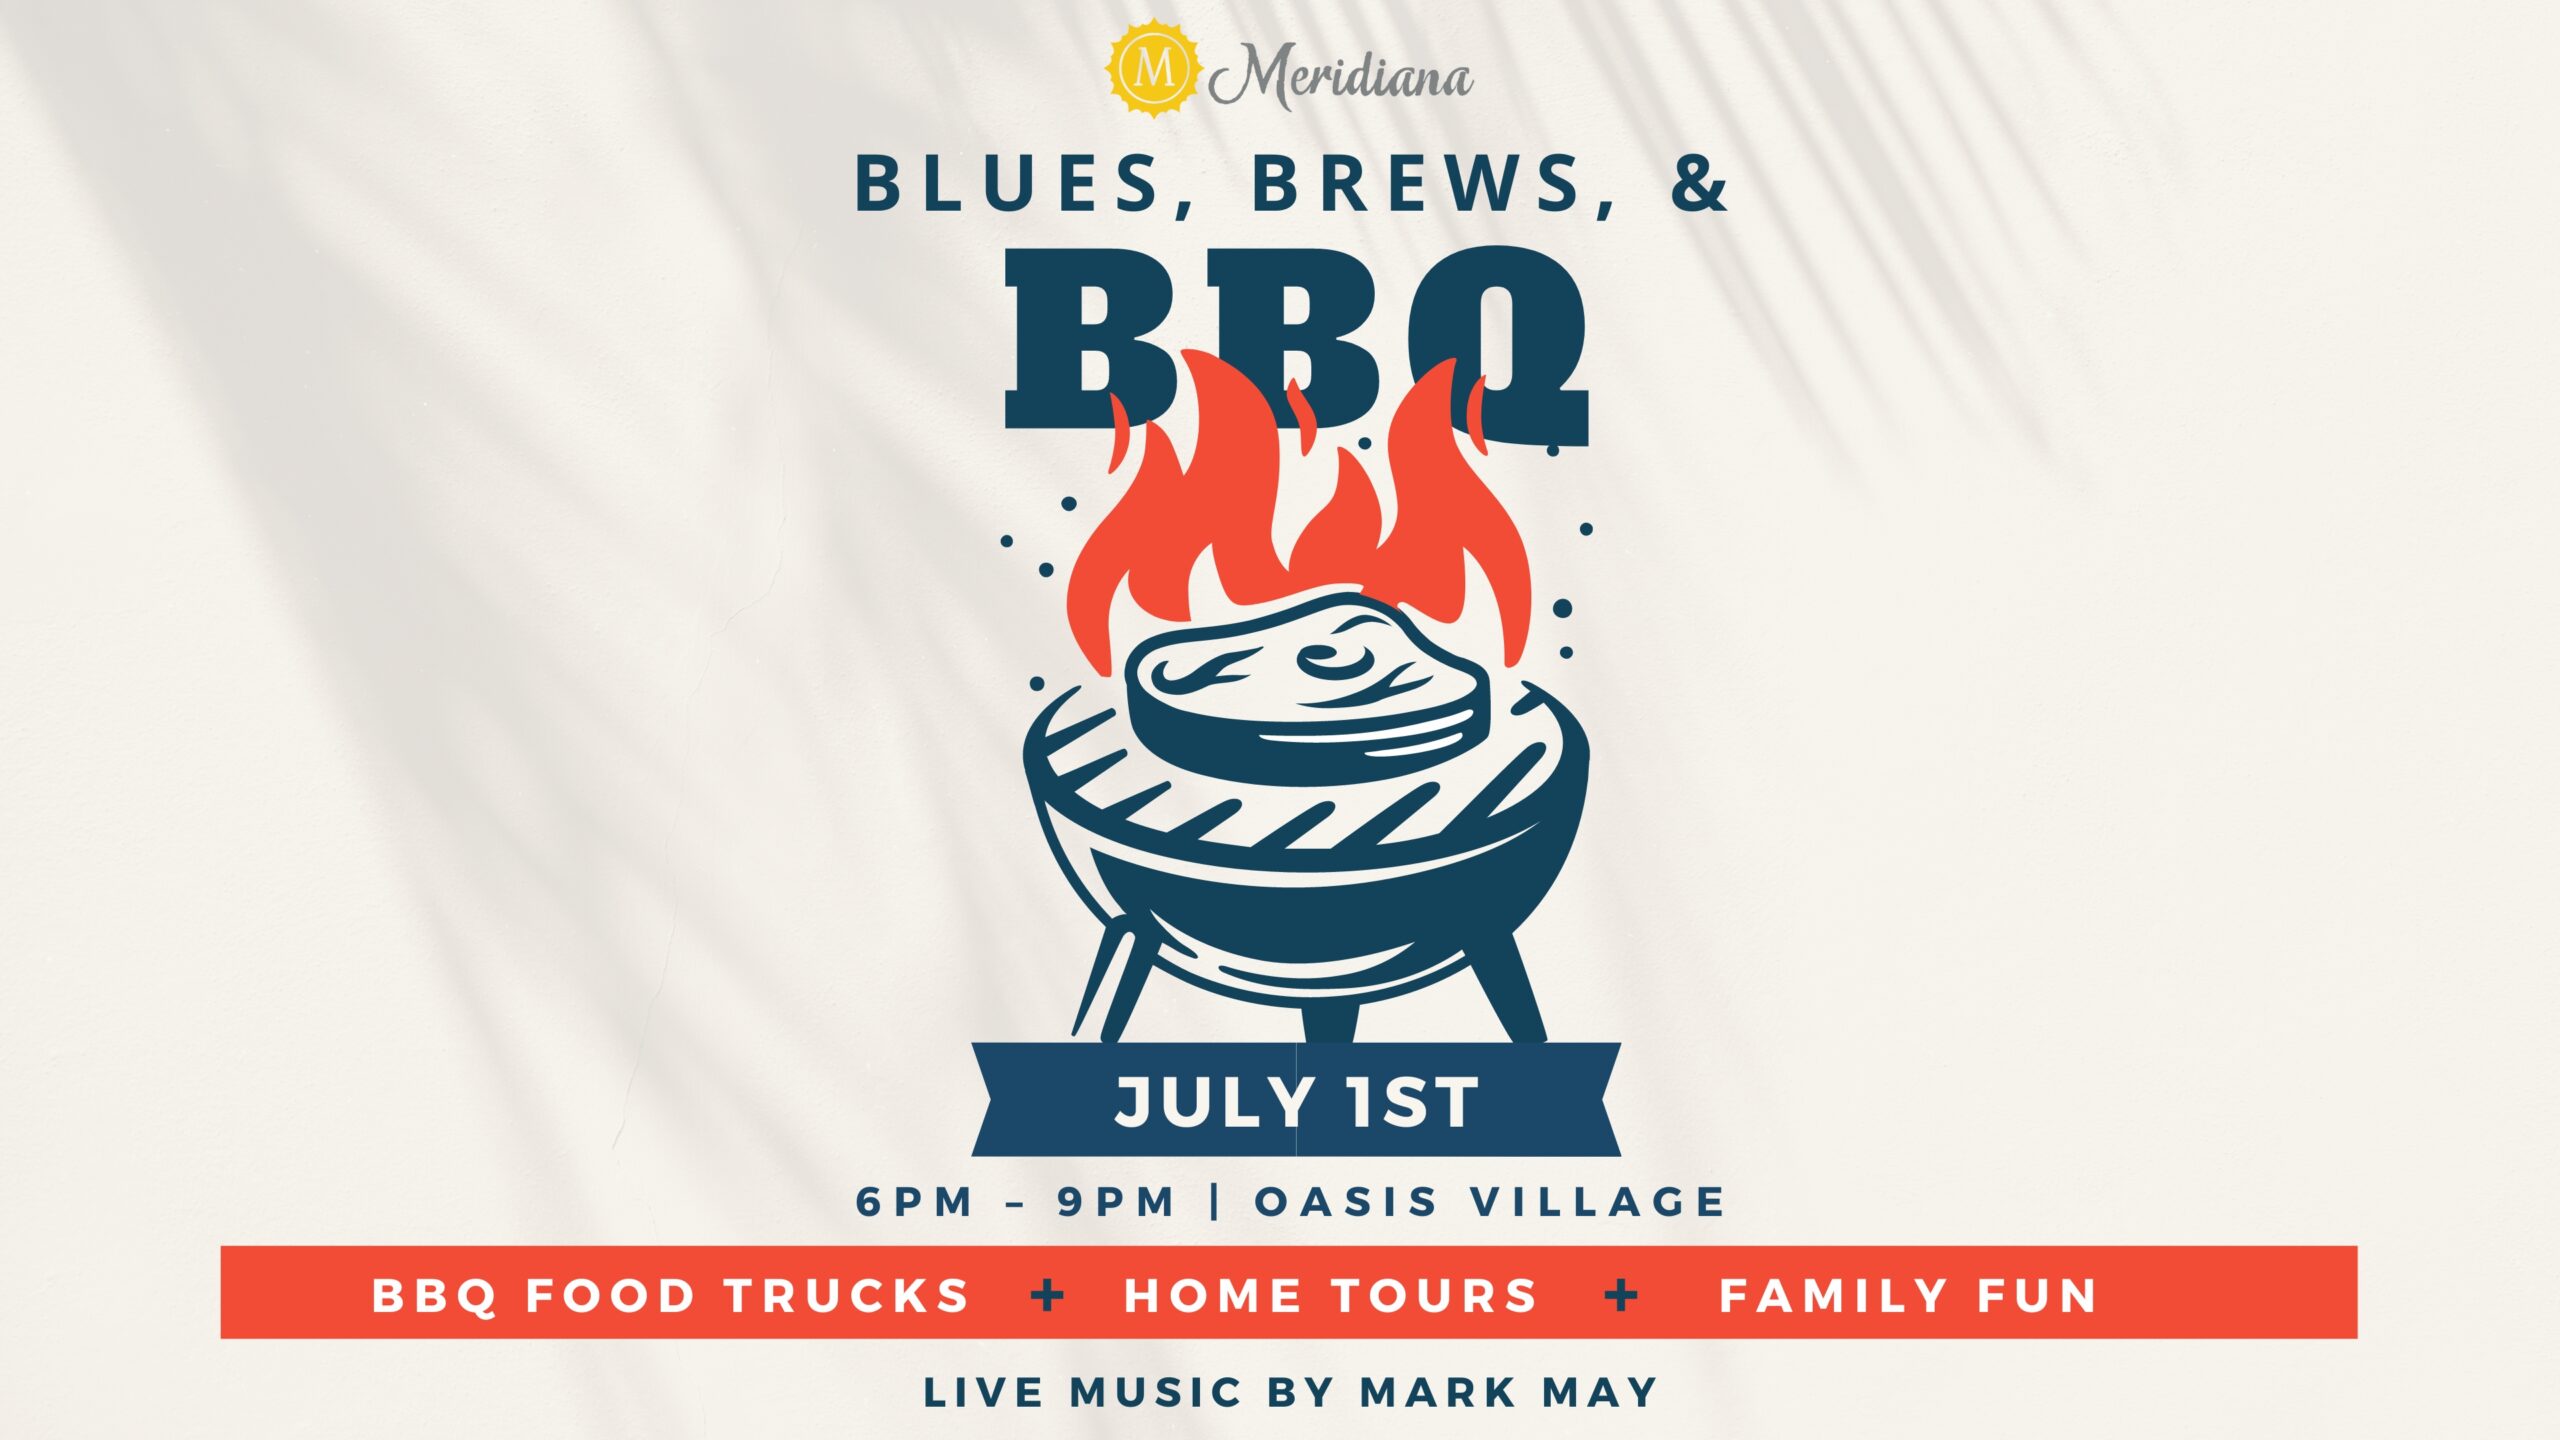 Kick Off July Fourth Weekend with Meridiana’s Blues, Brews, and BBQ